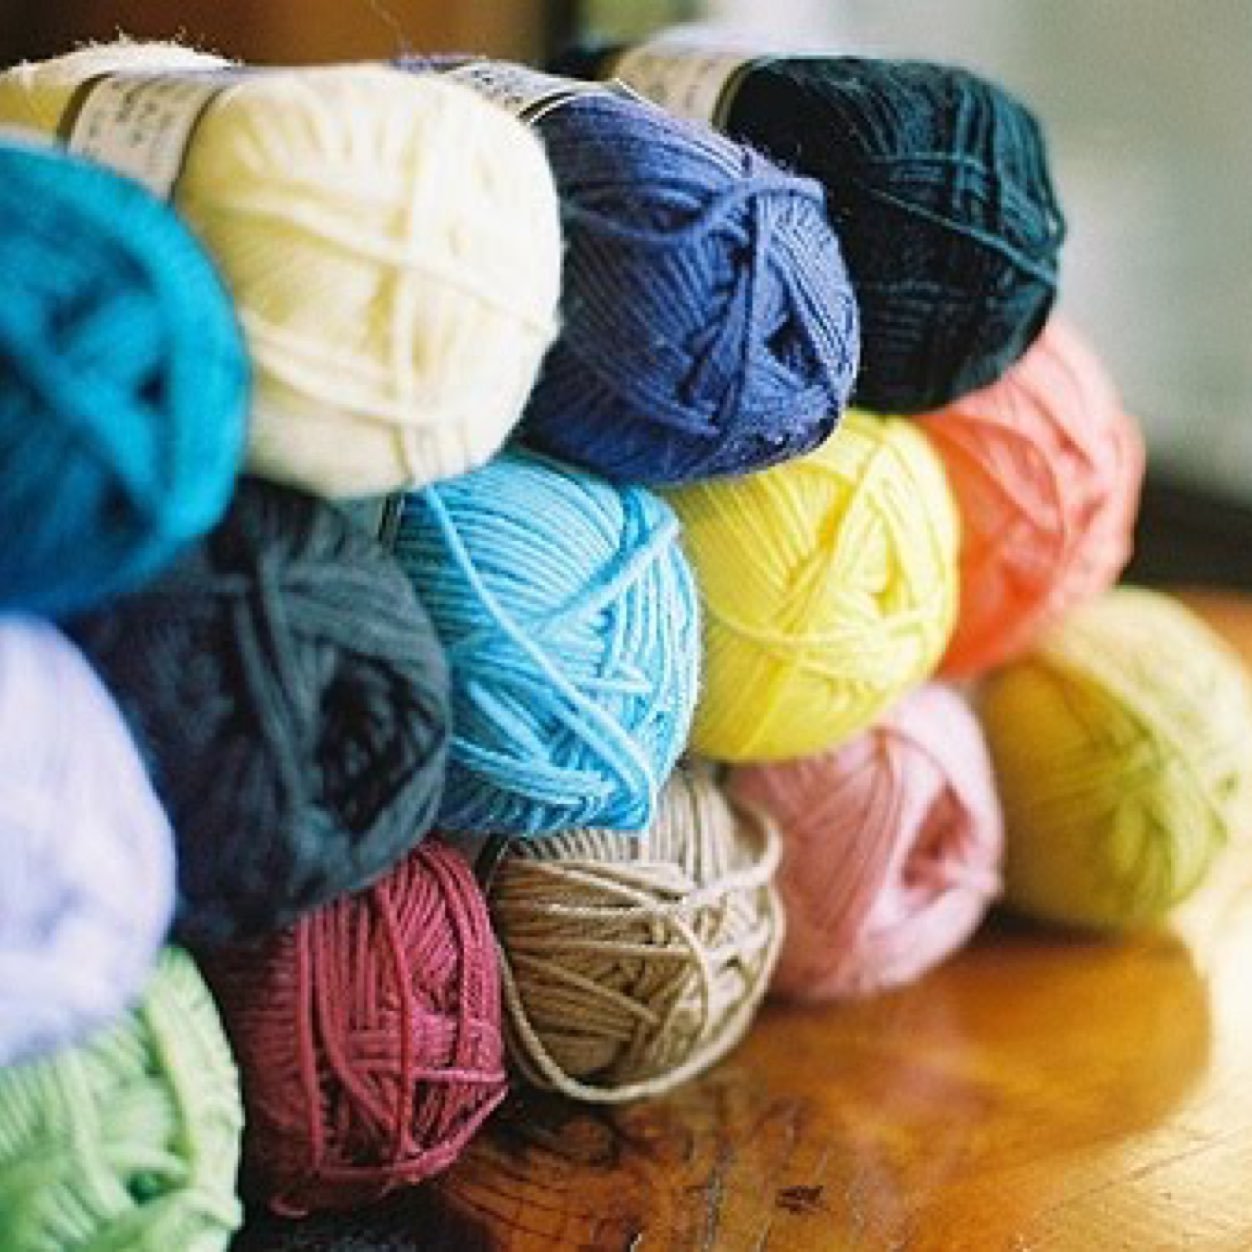 Heirloom-quality Gorgeous crocheted items (afghans, baby blankets, ponchos, shawls, hats, scarves). All handmade in a smoke-free, pet-free environment.